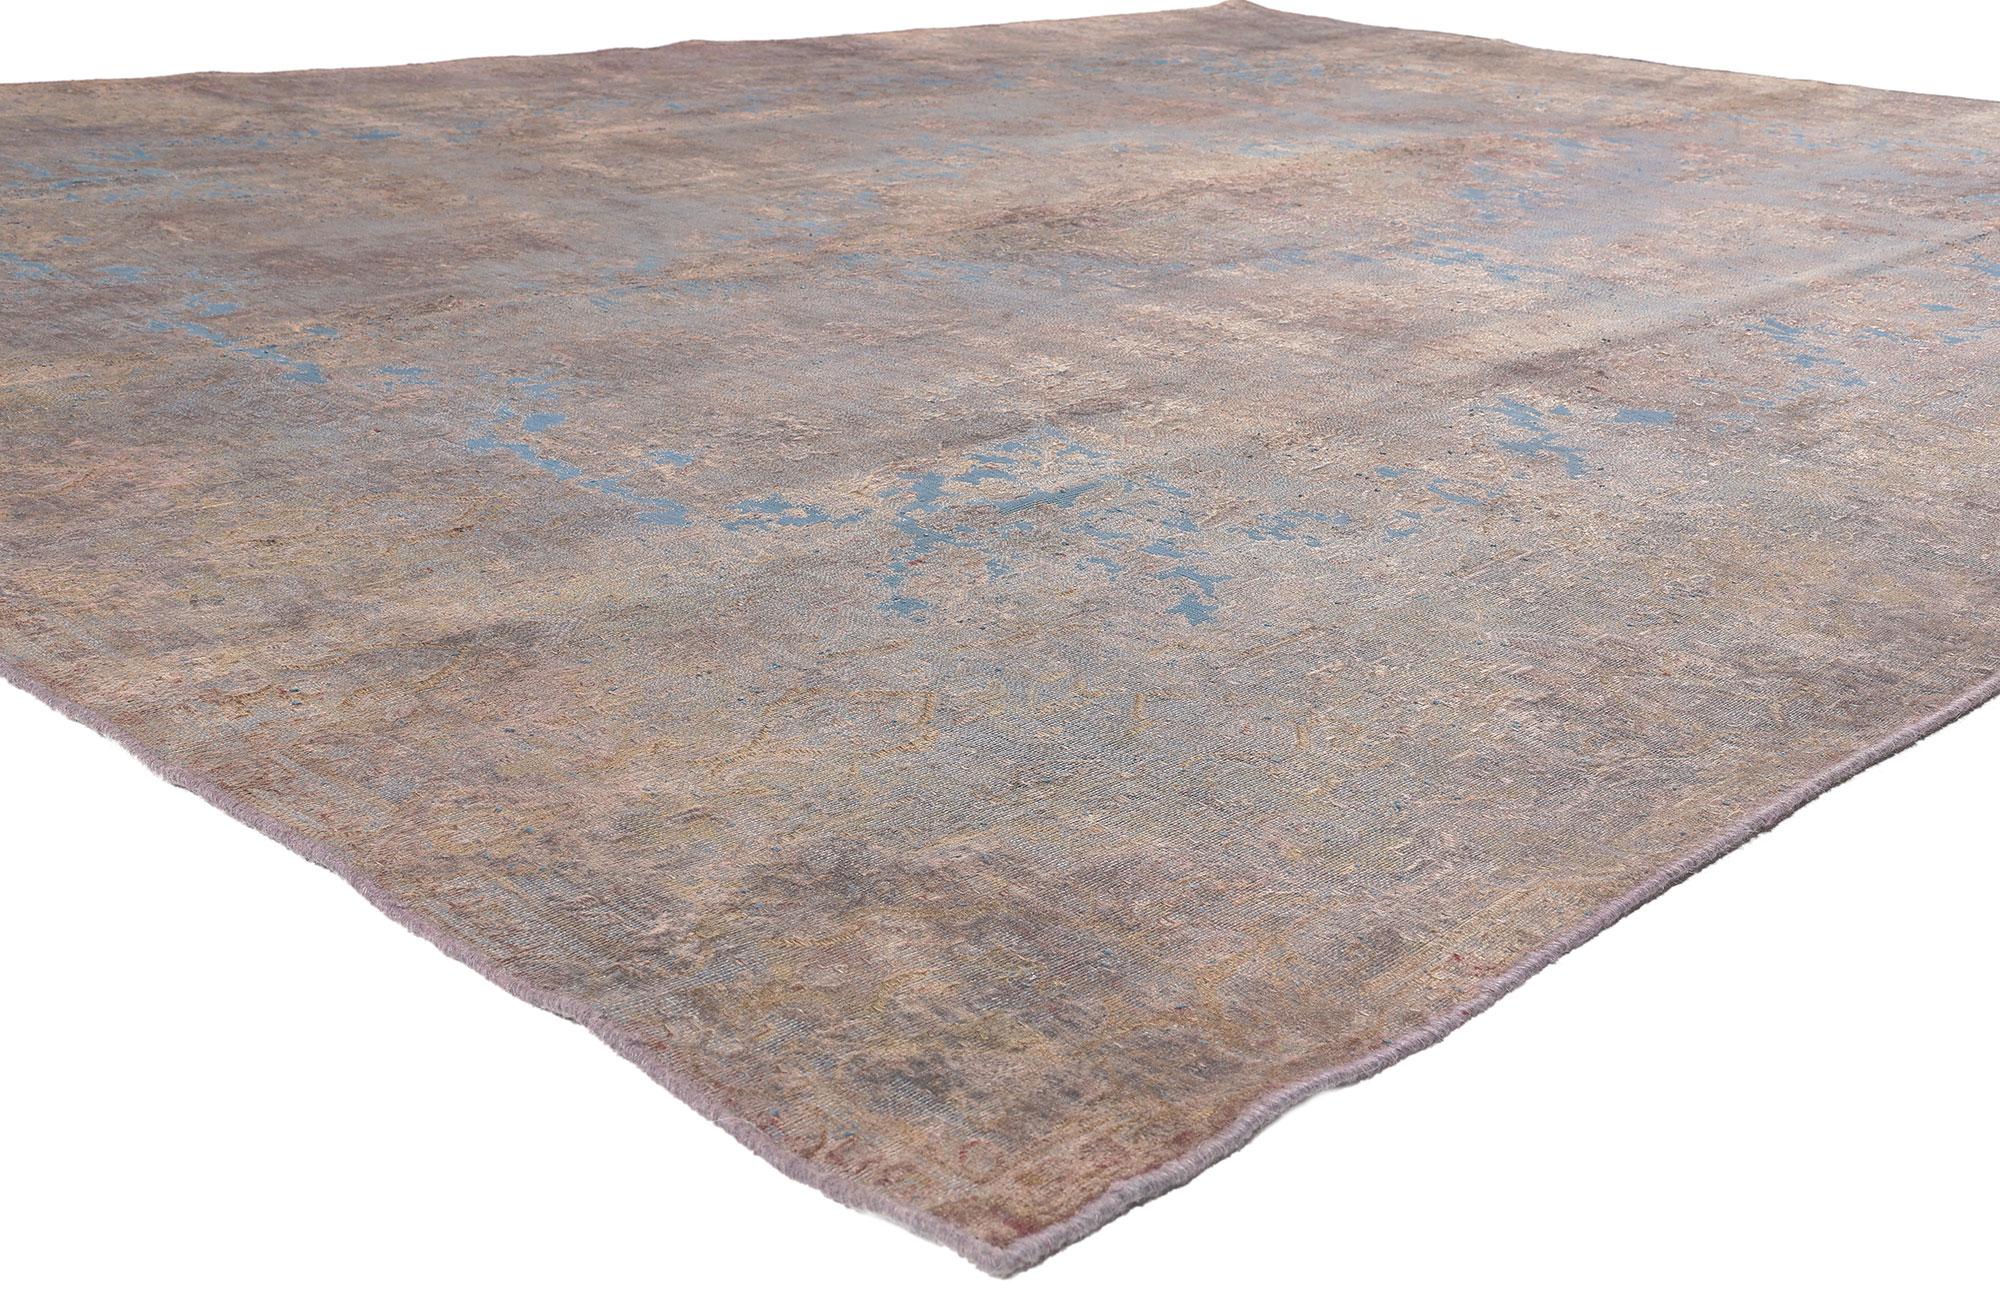 60782 Vintage Turkish Overdyed Rug, 09'09 x 13'00. 
French Provincial meets Bridgerton style in this hand knotted wool vintage Turkish overdyed rug. The soft pastel colors and highly decorative details in this piece capture the essence of